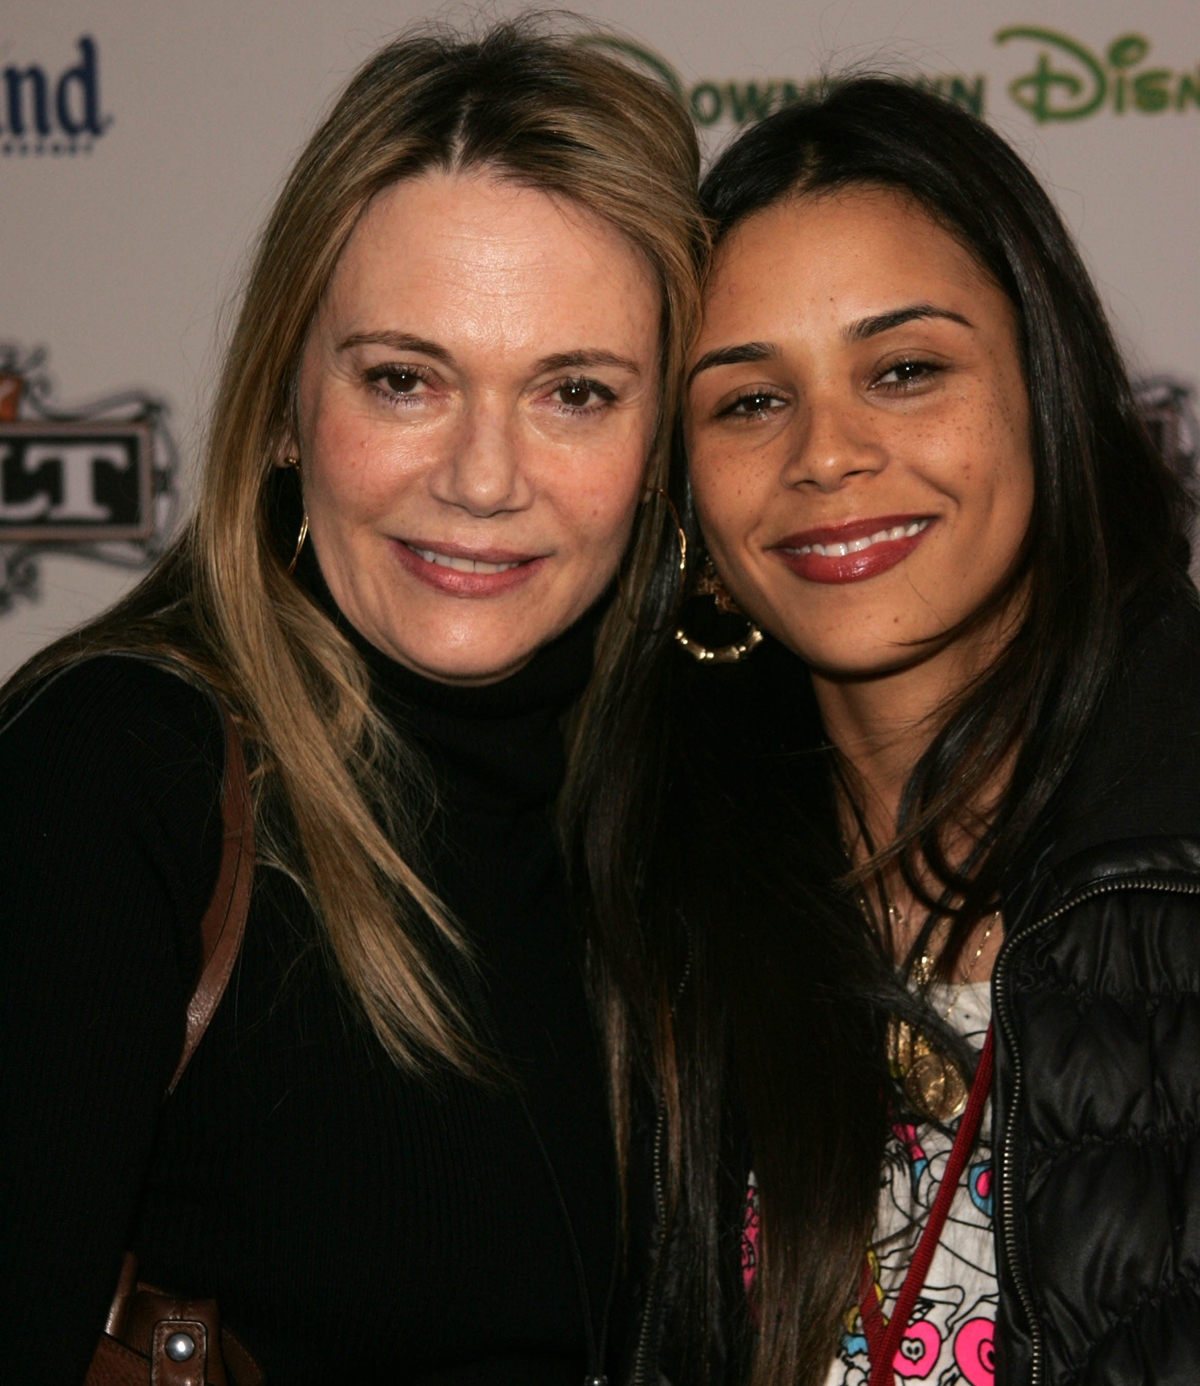 Quincy Jones's ex-wife Peggy Lipton, who died of colon cancer in Los Angeles on May 11, 2019, posing with her elder daughter Kidada Jones